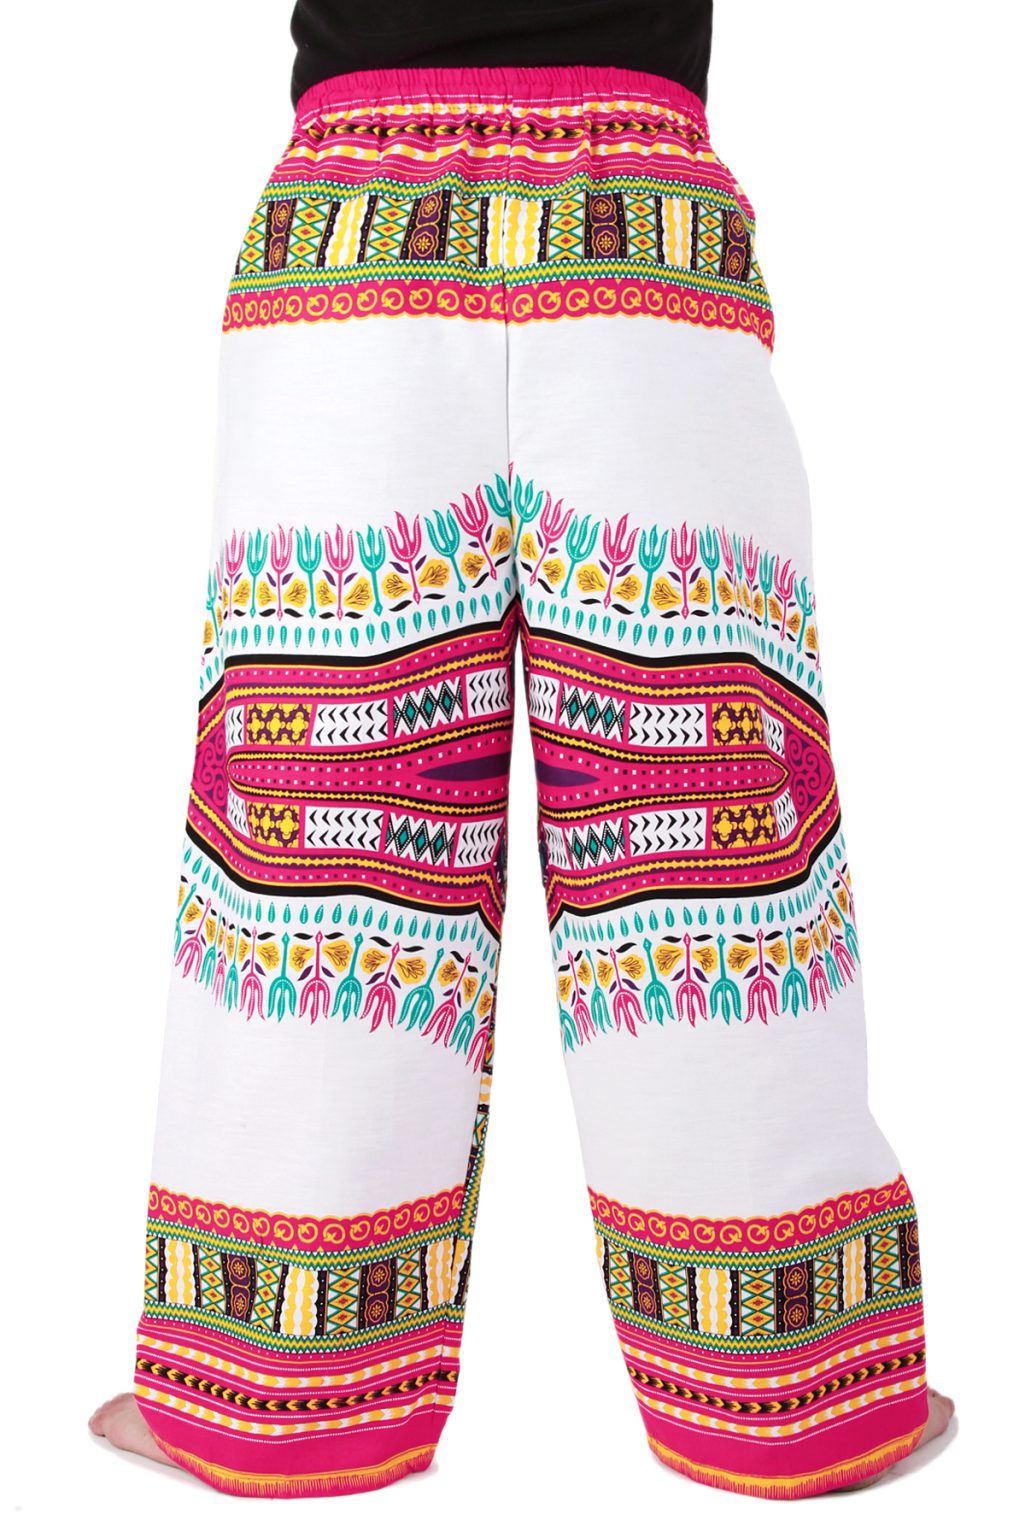 dashiki online store which have african print pants for dashiki womens